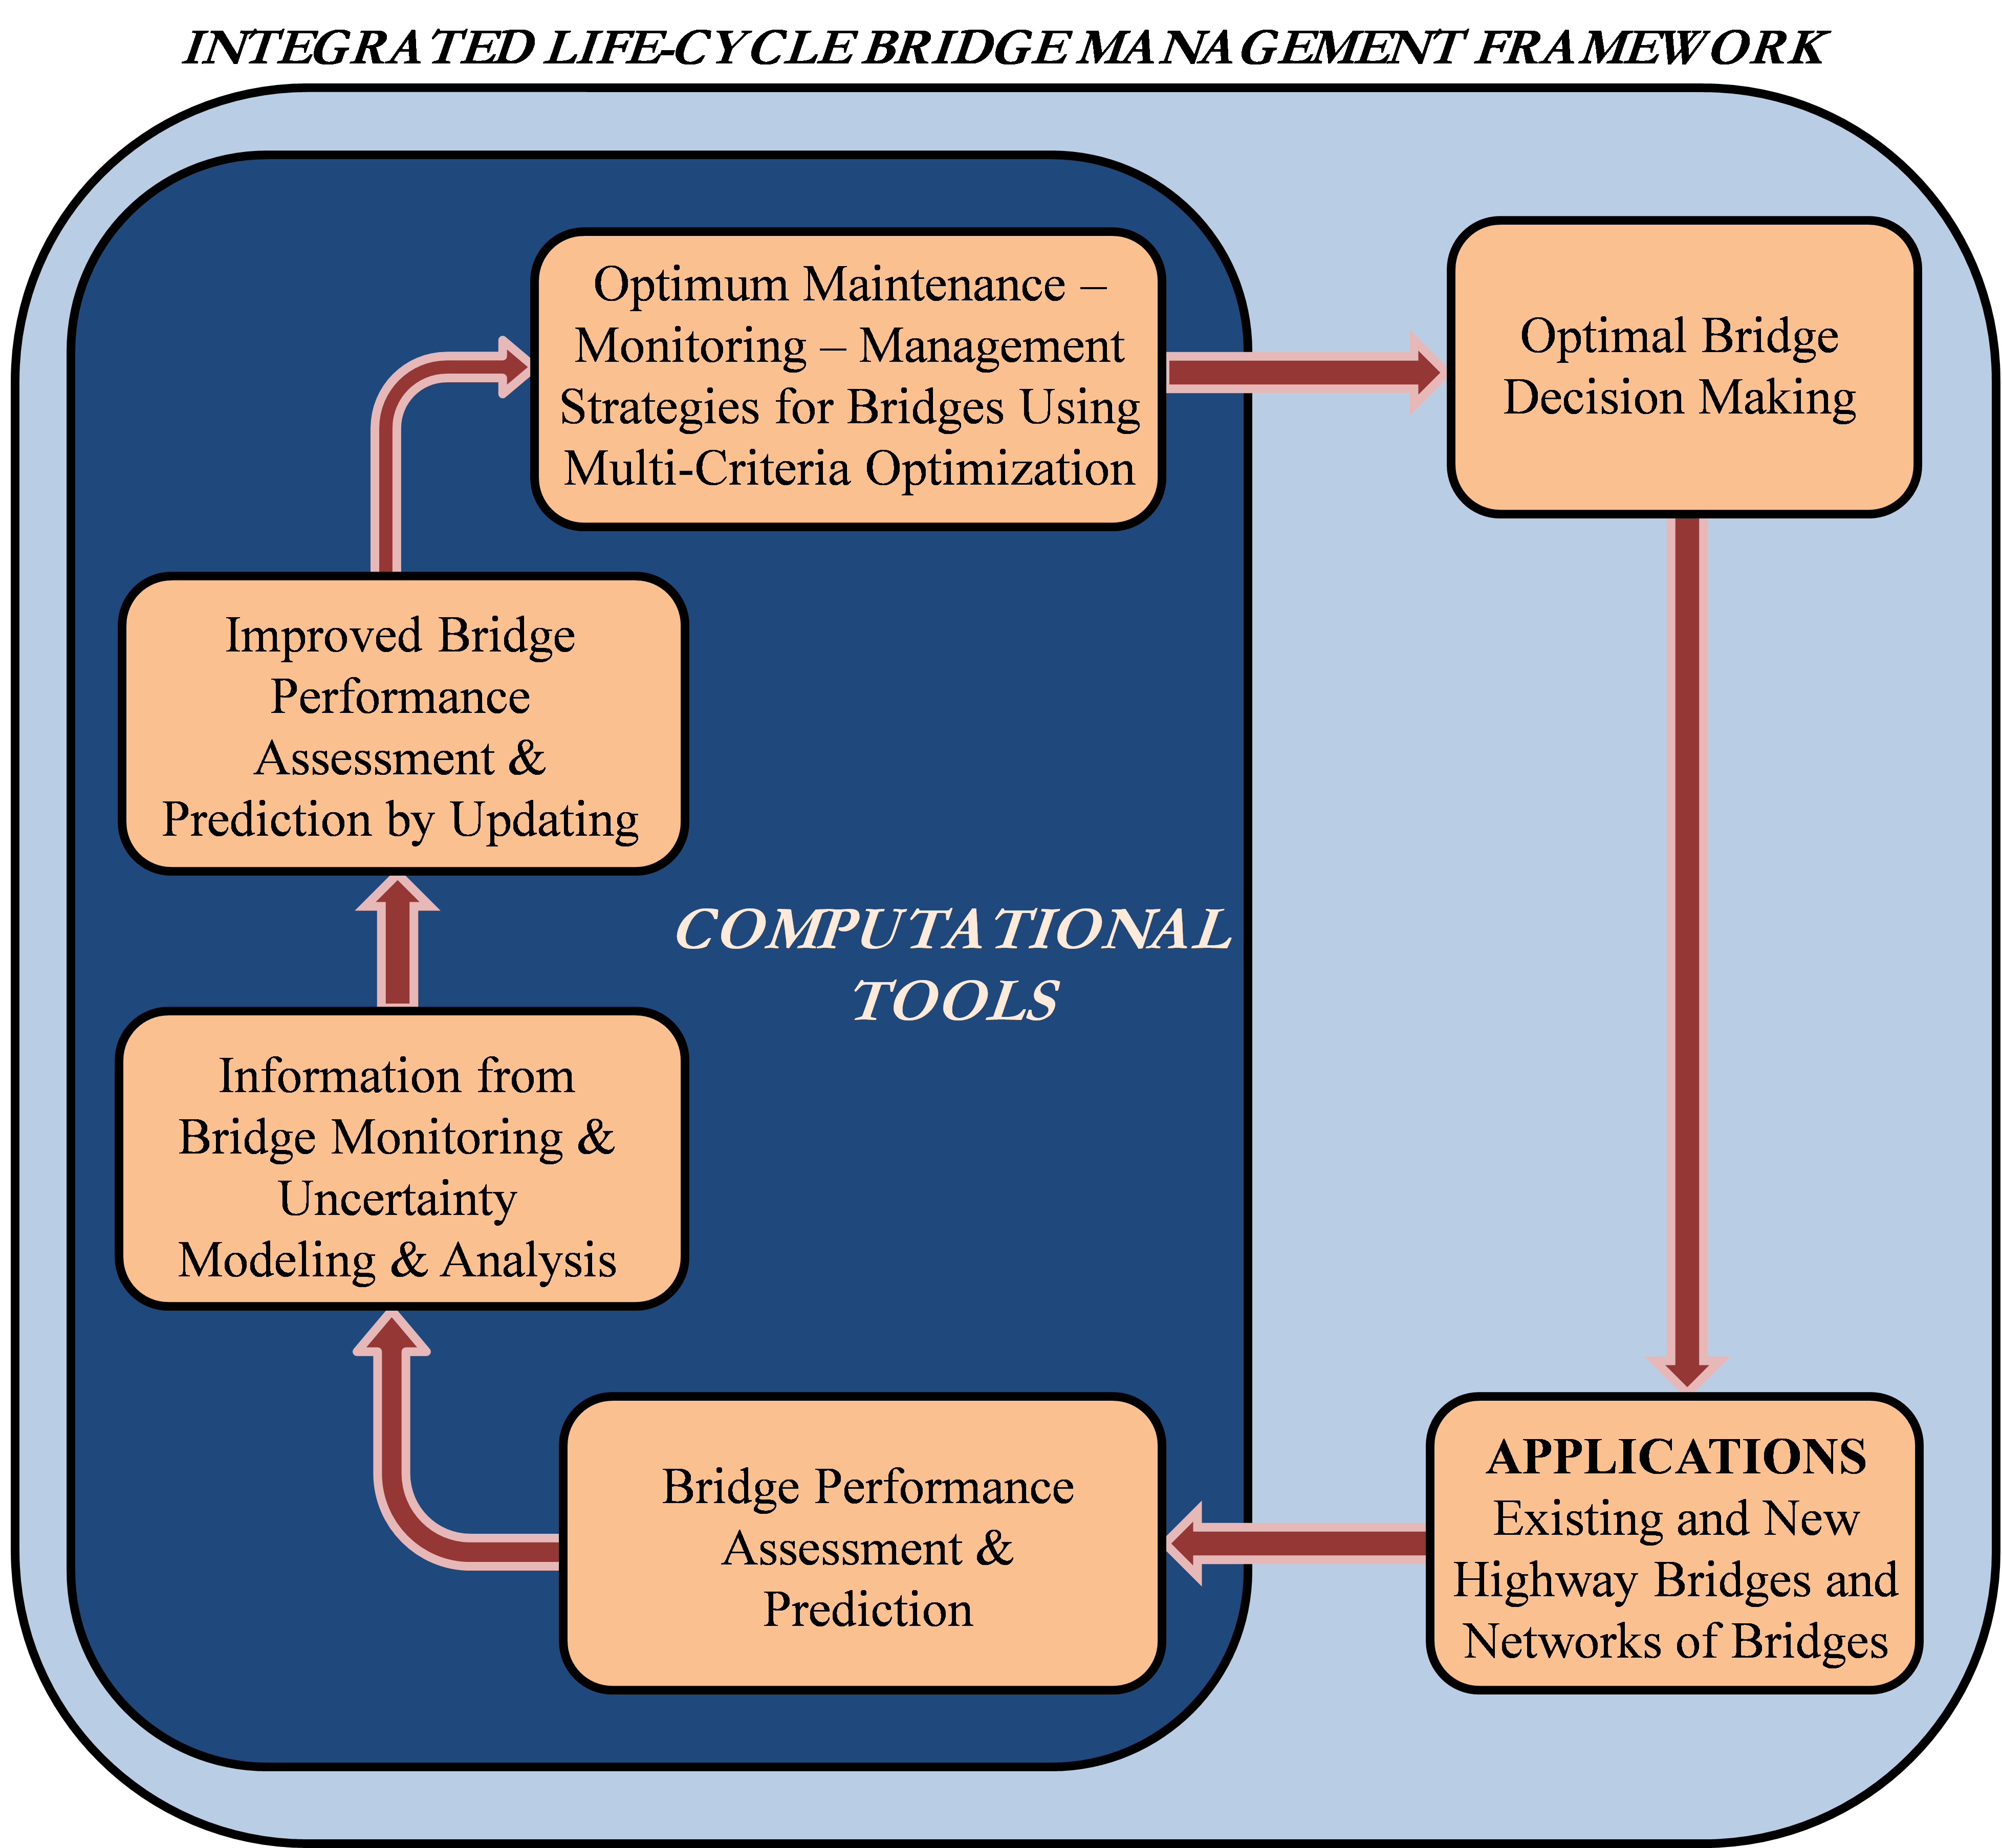 Figure 10. Chart. Integrated Life-Cycle Bridge Management Framework. This graphic shows a conceptual framework for the life-cycle of integrated bridge management for bridges. The computational tools shown are Bridge Performance Assessment and Prediction, Information from Bridge Monitoring and Uncertainty Modeling and Analysis, Improved Bridge Performance Assessment and Prediction by Updating, and Optimum Maintenanceâ€”Monitoringâ€”Management Strategies for Bridges Using Multi-Criteria Optimization. Application of these tools and strategies leads to Optimal Bridge Decisionmaking with applications for Existing and New Highway Bridges and Networks of Bridges.